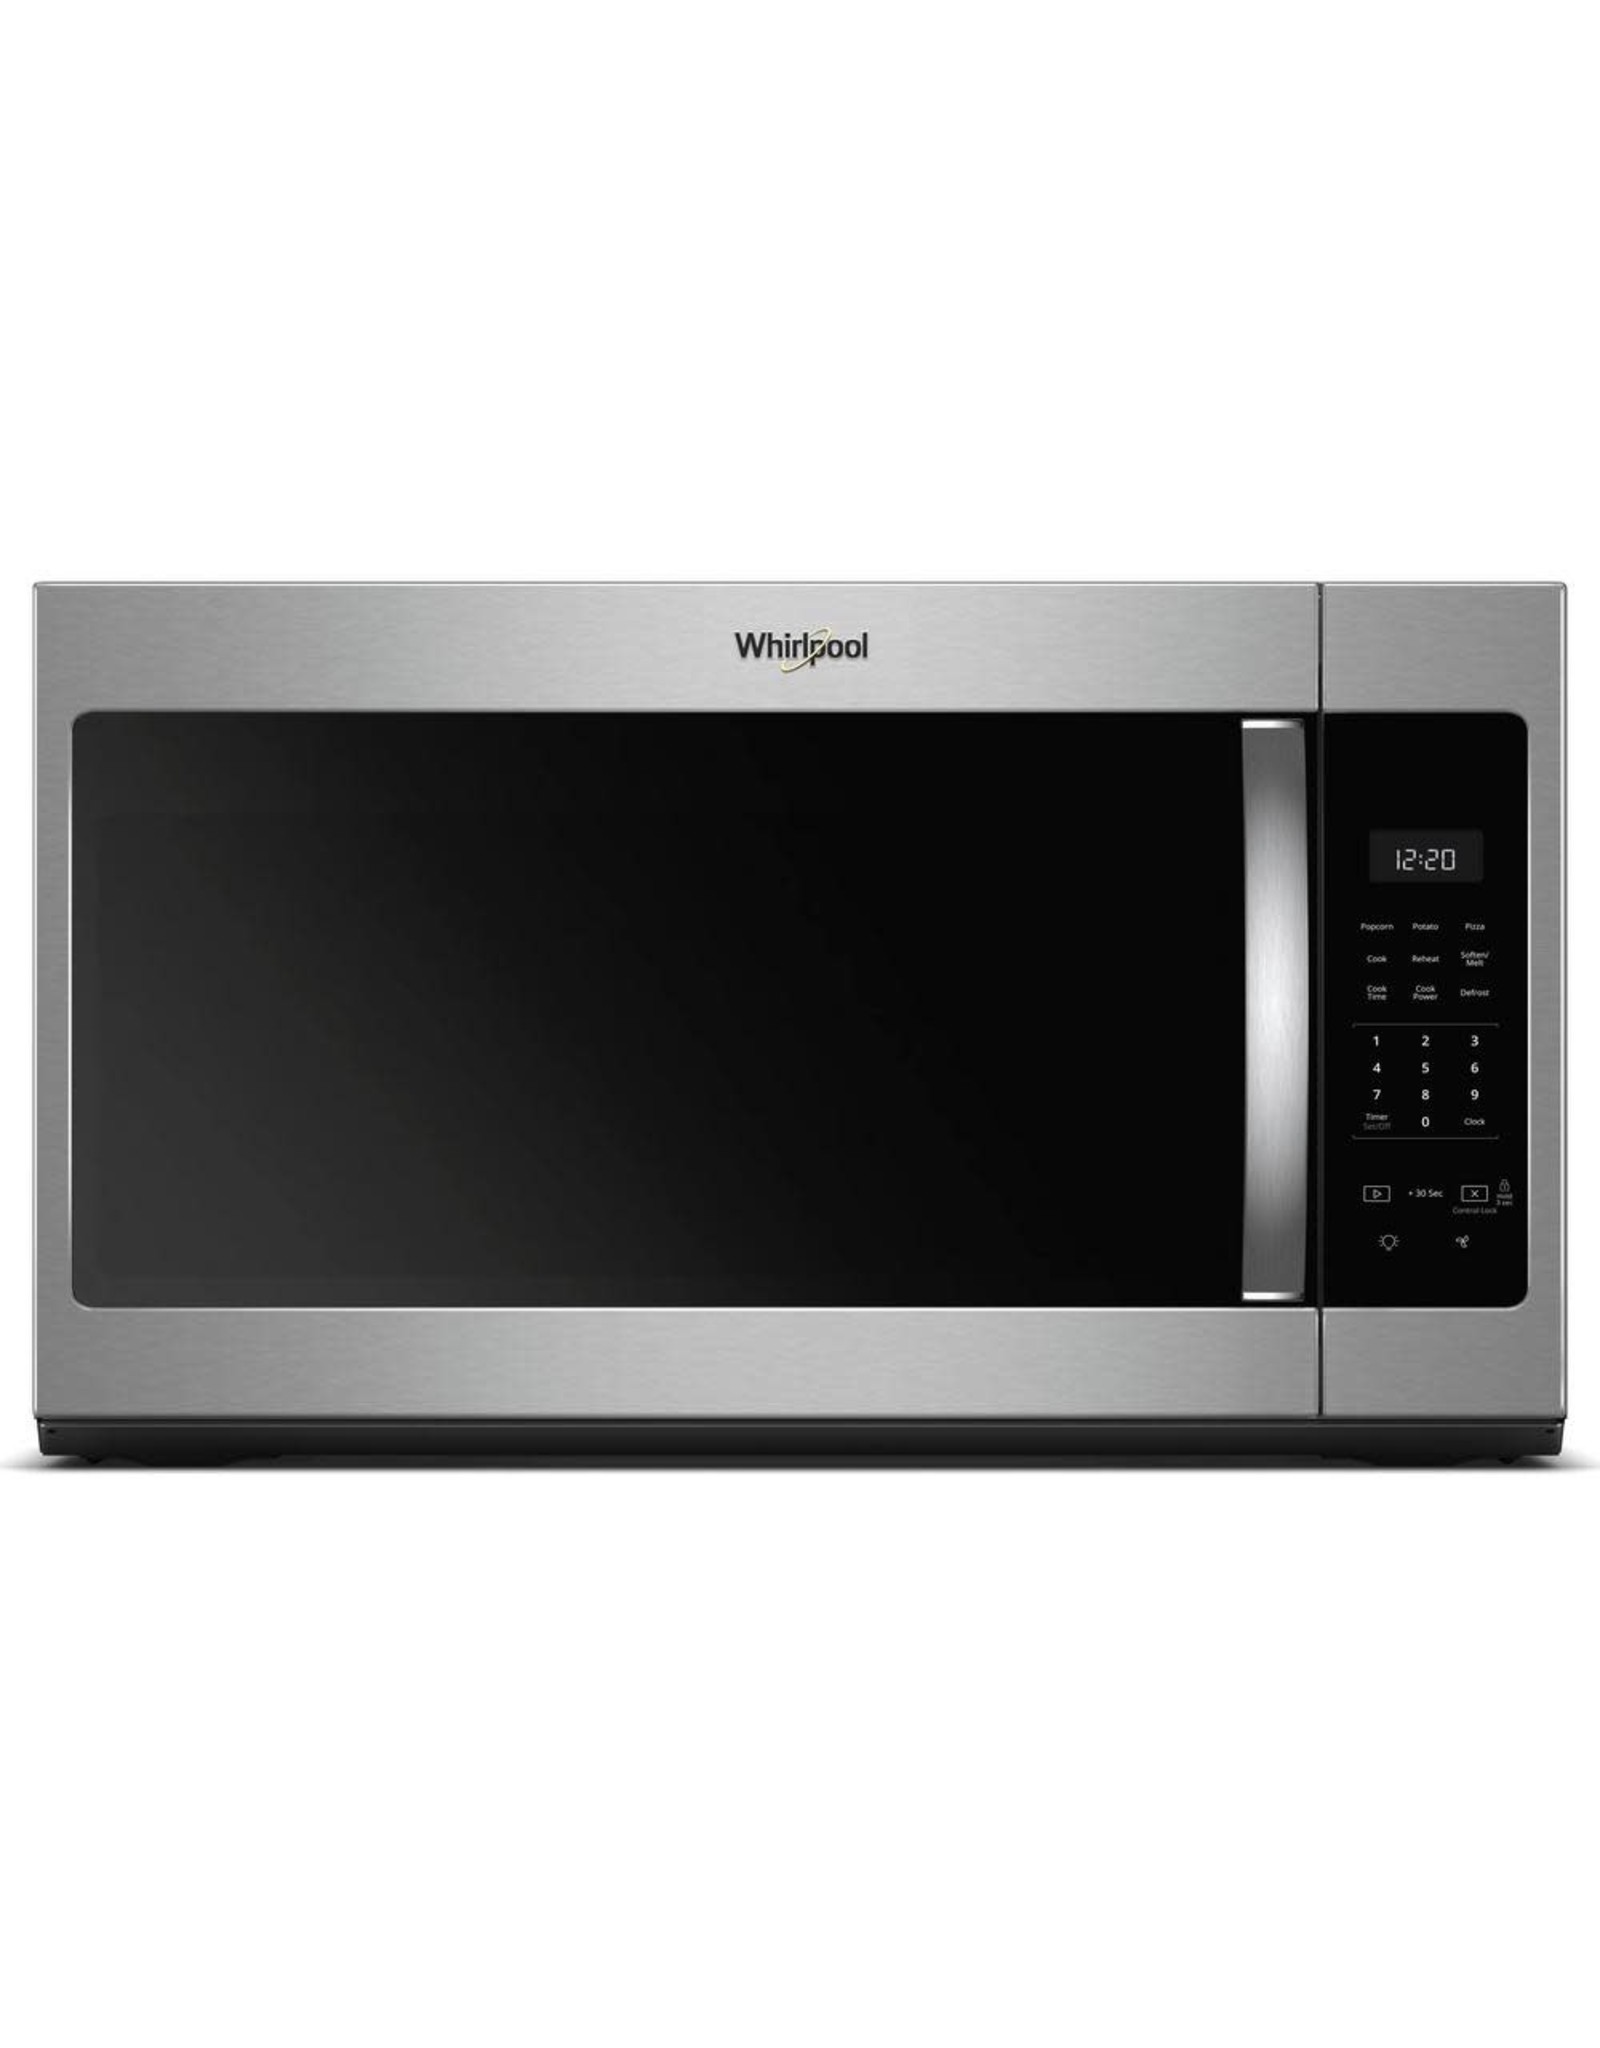 WMH31017HS WHR Microwave, Hood, Combination – 1.7 CU FT, 1000 WATTS, 2-PIECE FRONT, ST